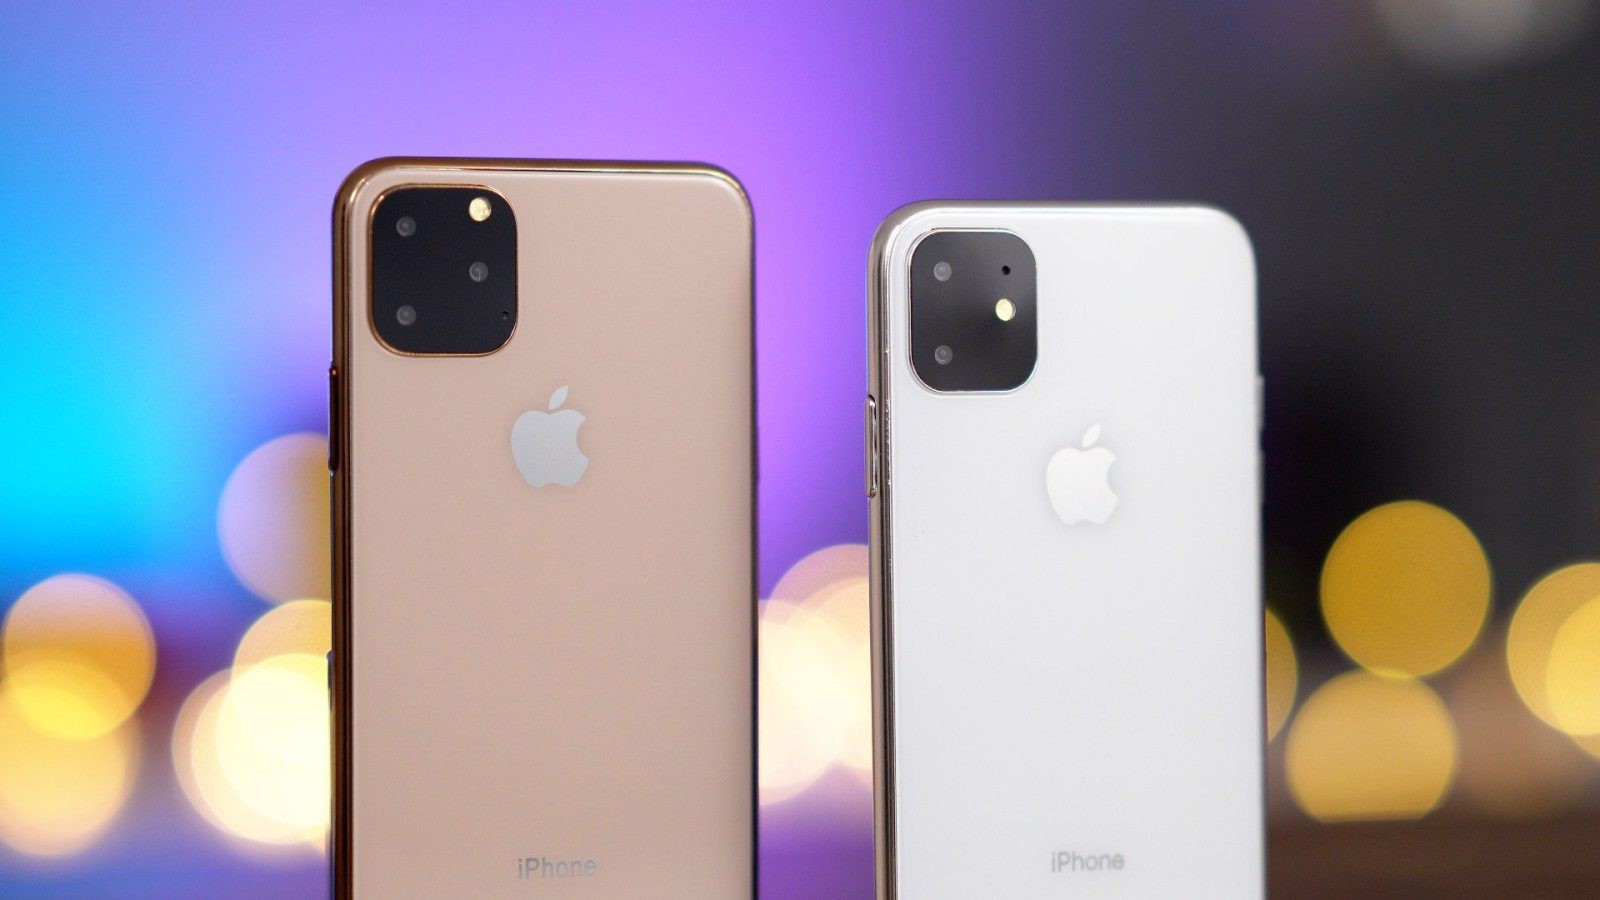 IPhone 11 pre-order and sale date revealed before coming to market